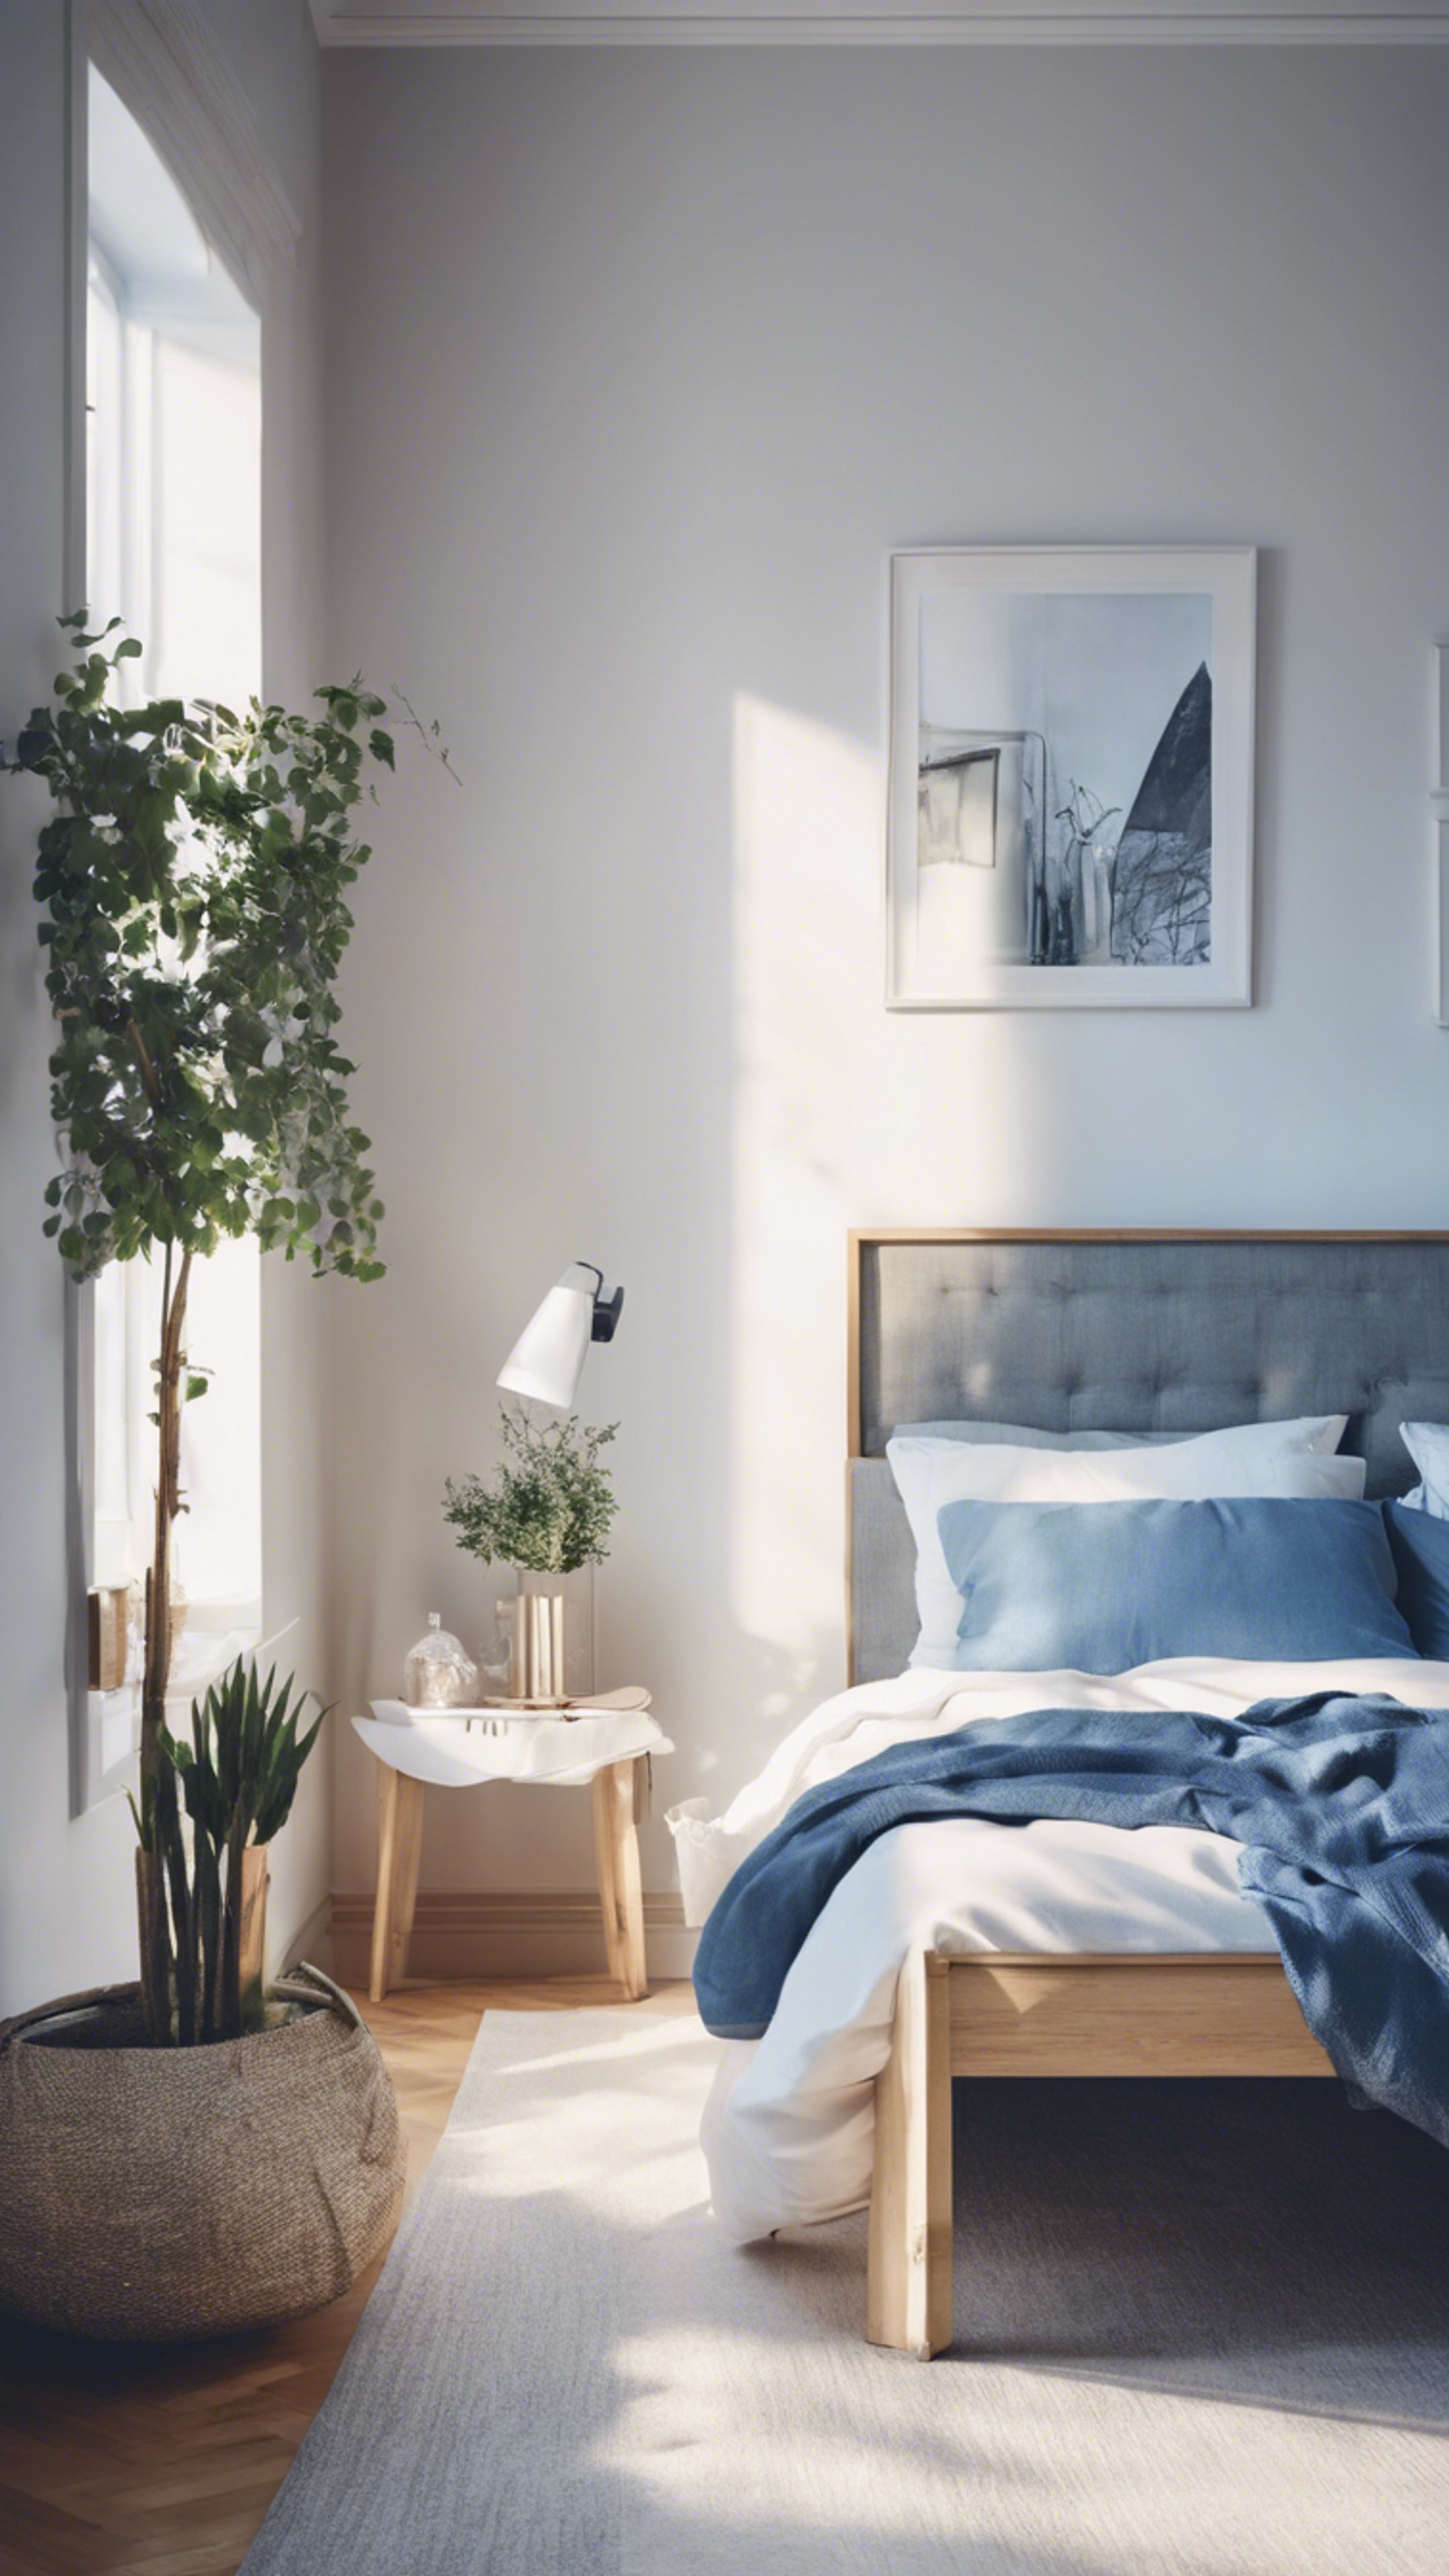 A Scandinavian style bedroom with white and blue minimalist decor bathed in morning sunlight. Papel de parede[5ddcfeaf0e5340e39bc5]